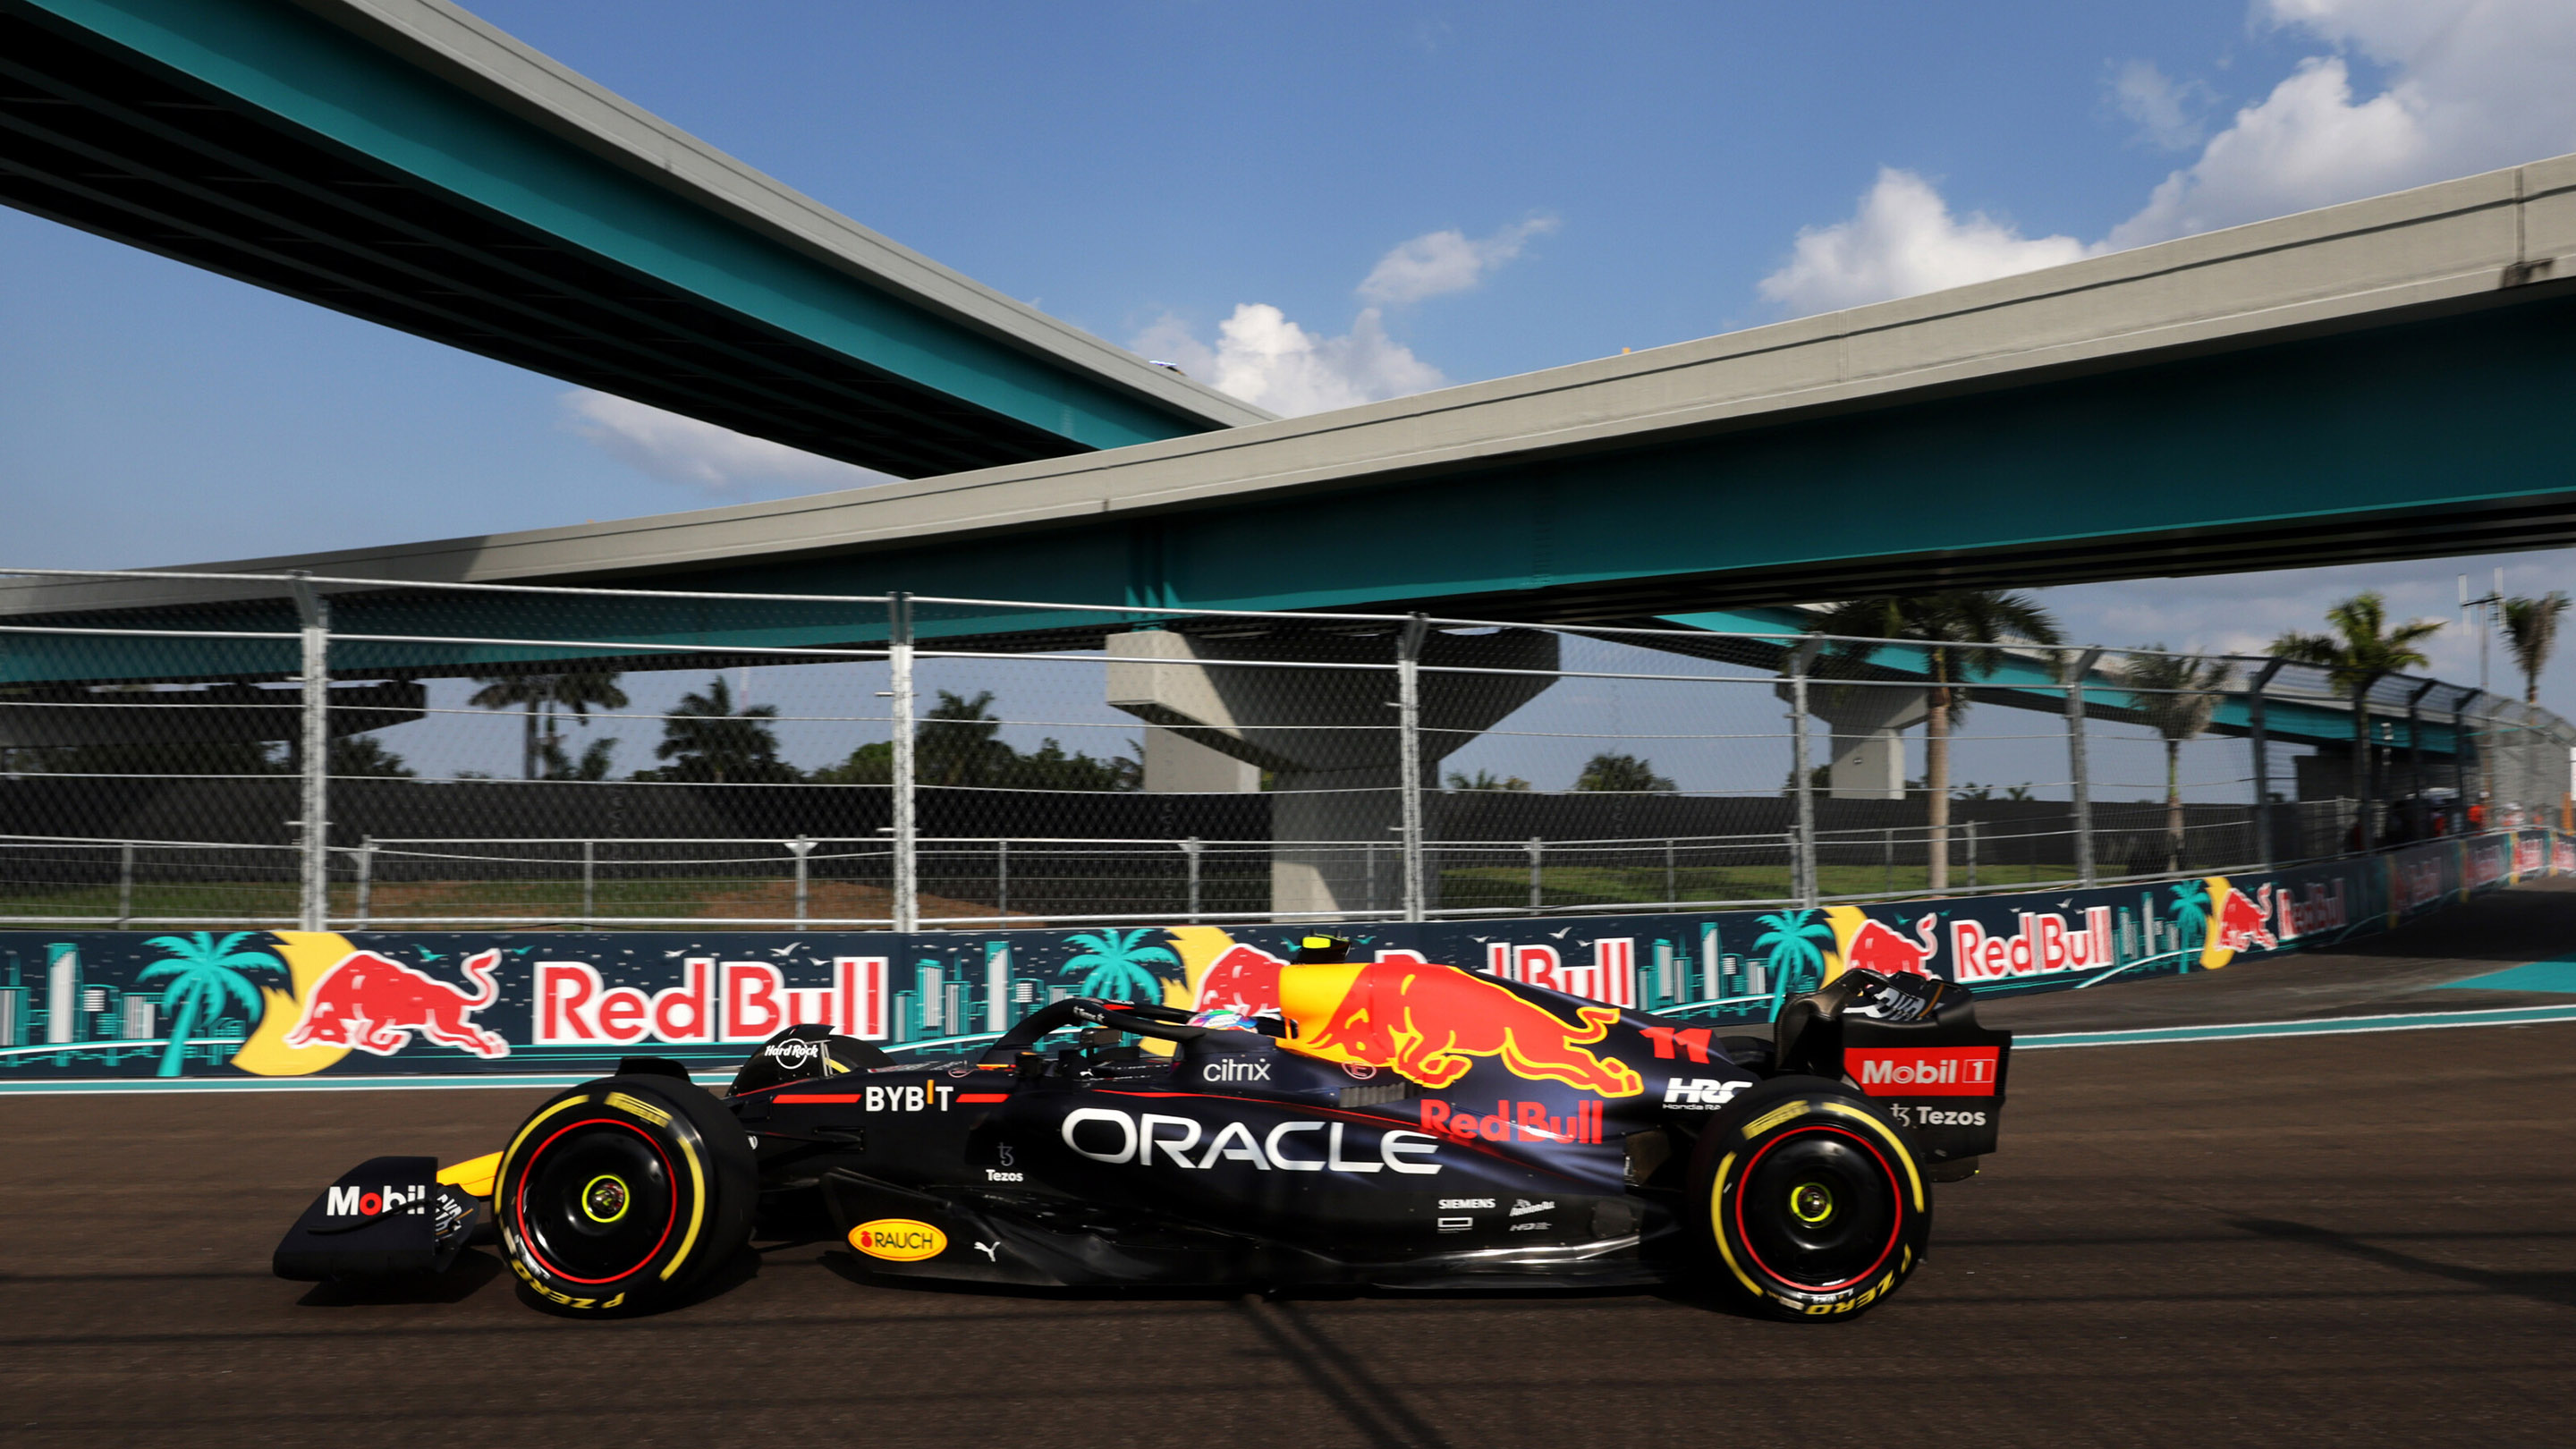 Image The 2022 F1 season has seen a raft of new rules introduced which has resulted in a completely new look and feel for the cars. To find out more about the Oracle Red Bull Racing’s RB18, click here to view the launch.